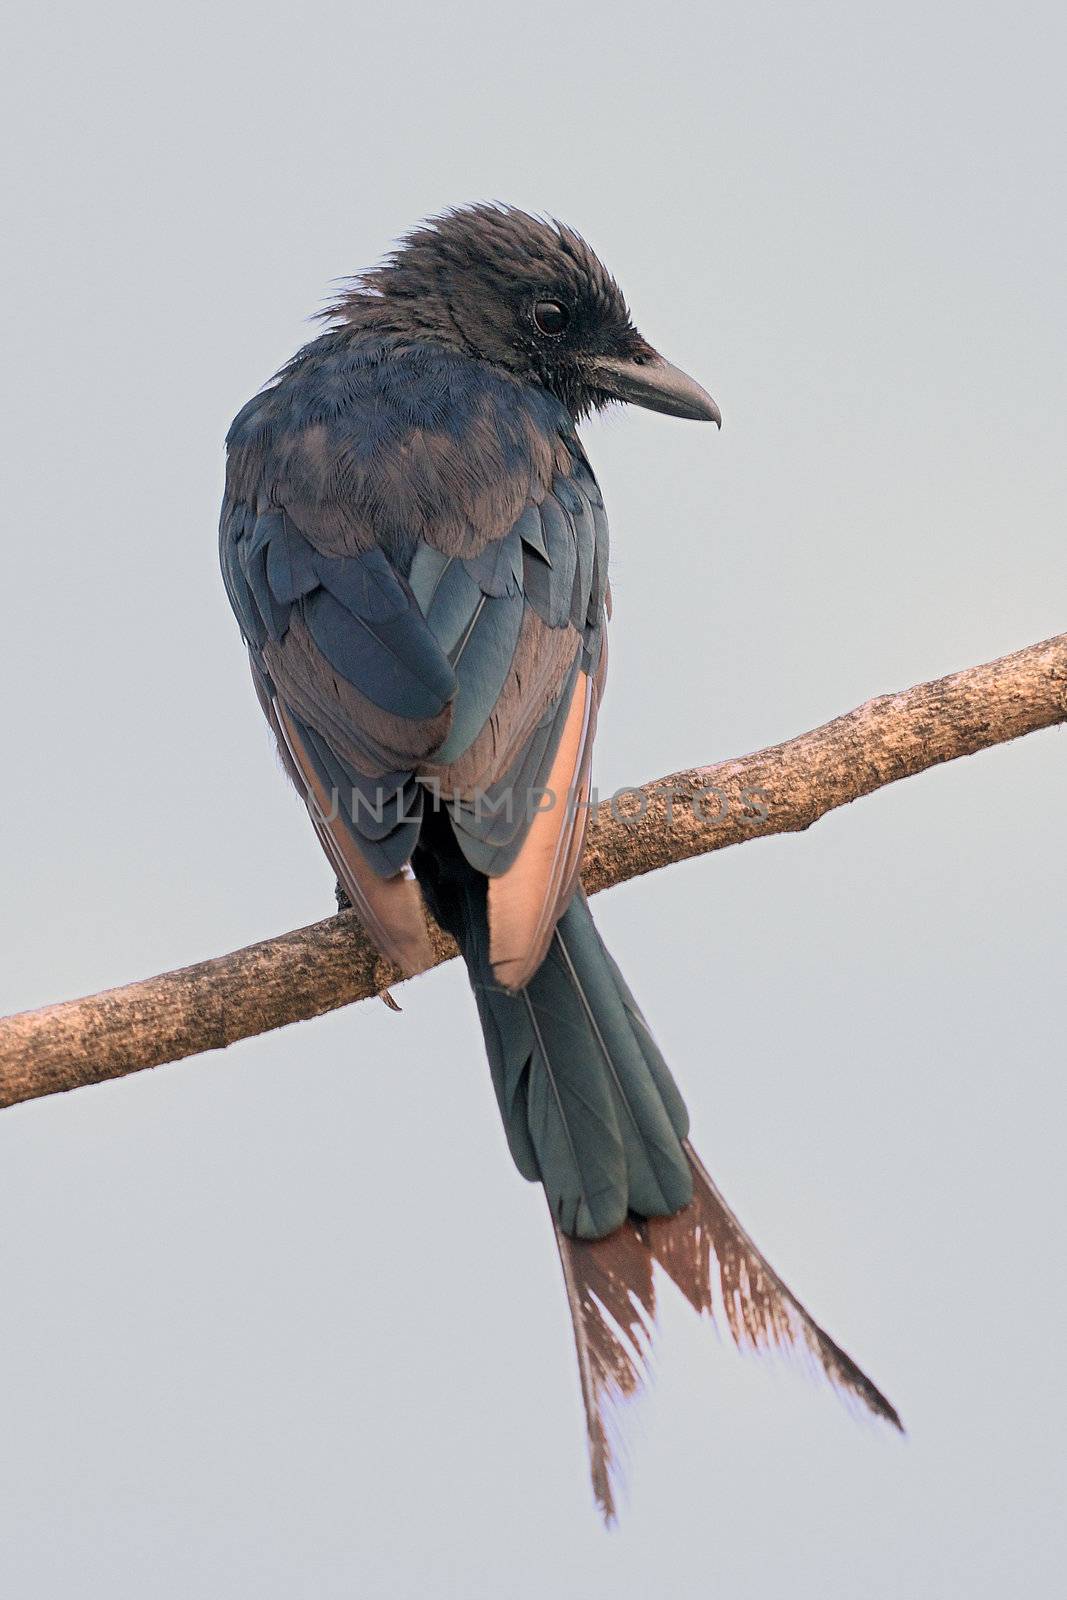 A cute drongo bird isolated on a clean background